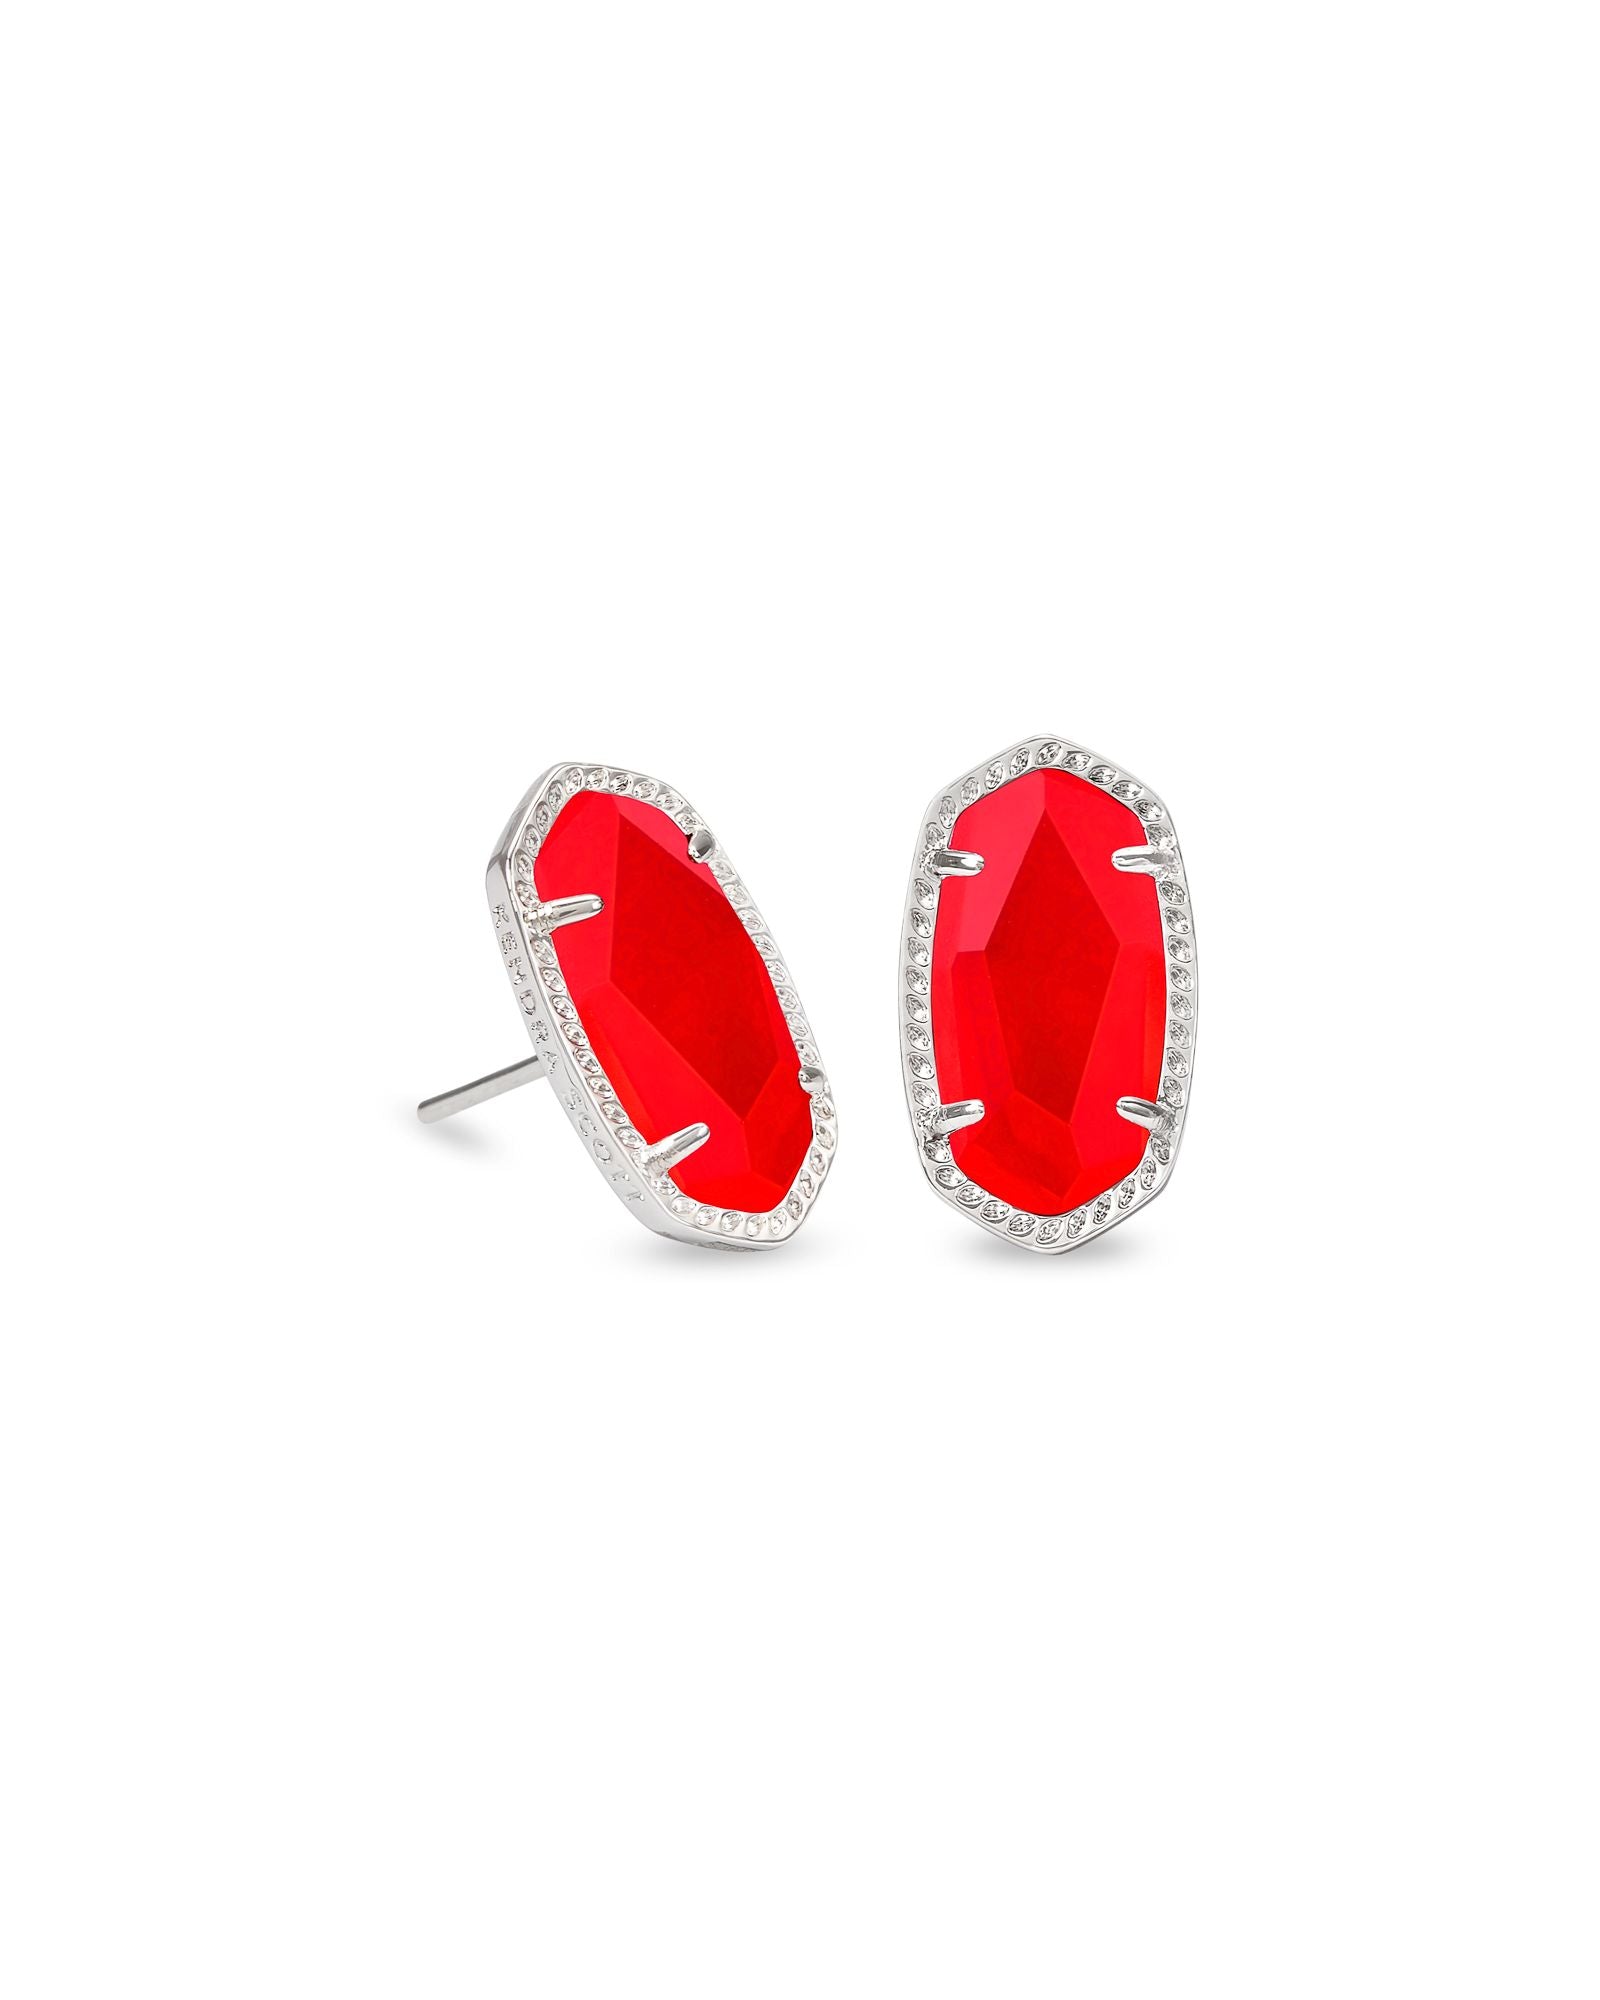 Kendra Scott | Ellie Silver Stud Earrings in Red Illusion - Giddy Up Glamour Boutique